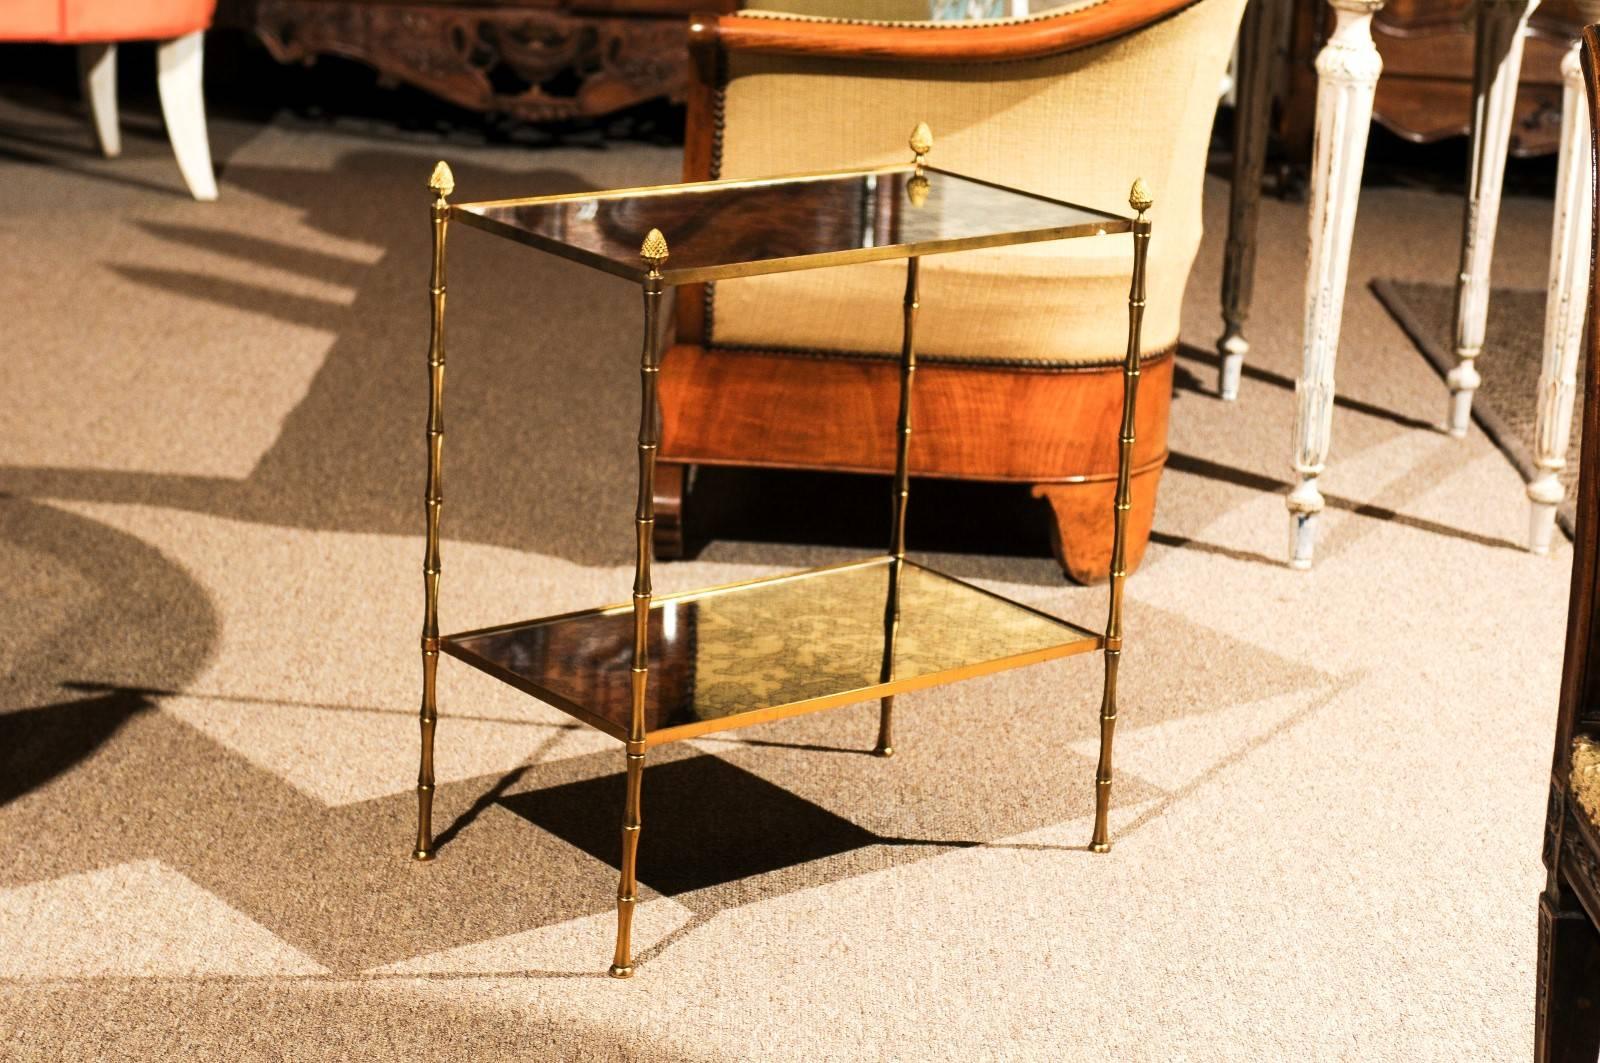 Midcentury Baguès style bronze and mirrored side table
This very useful table adds the contemporary look to your room. The bronze legs and acorn finials give this table an elegant look. Both the top and the shelf are mirrored. It would be lovely by